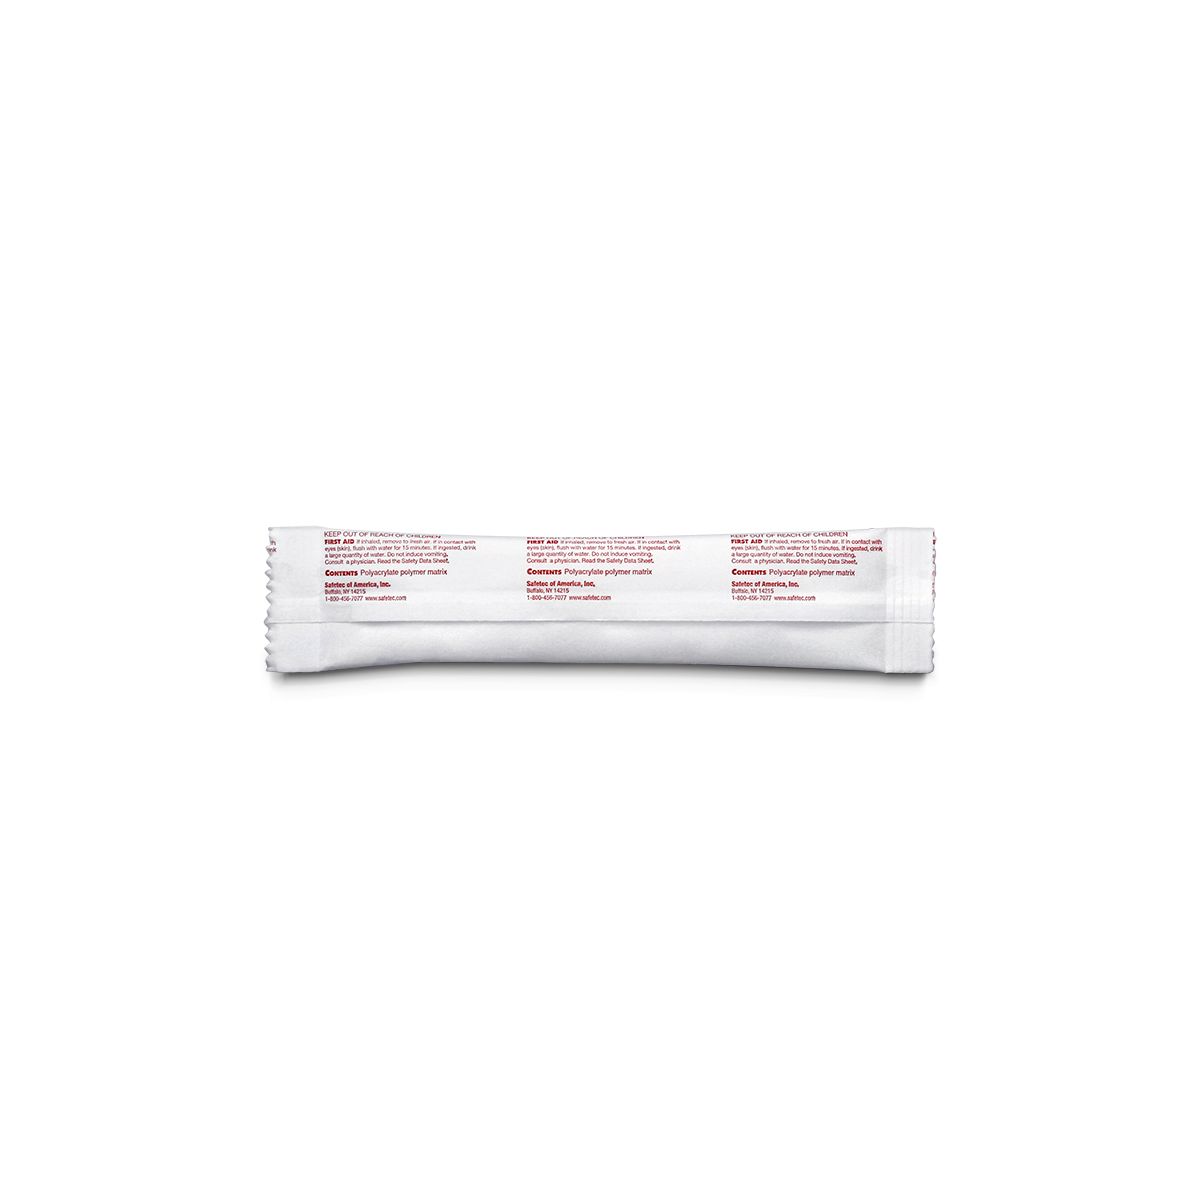 Red Z® Spill Control Solidifier Drop-In Pacs - Infection and Spill Control